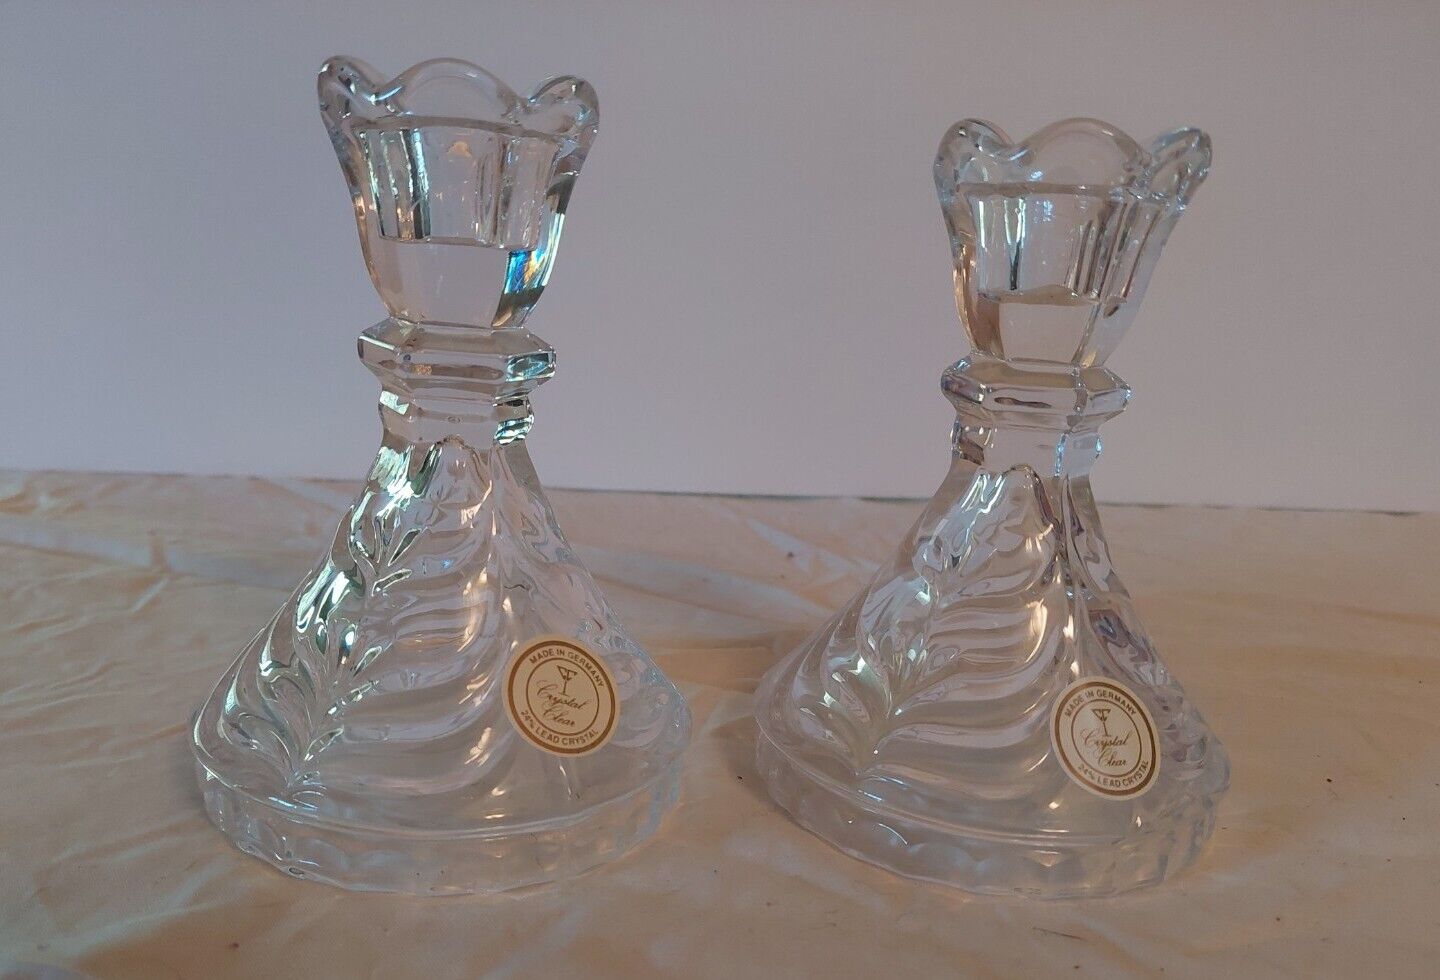 Rare Set of 2 Lead Crystal Candlestick Holders Germany Vintage Beautiful Classy